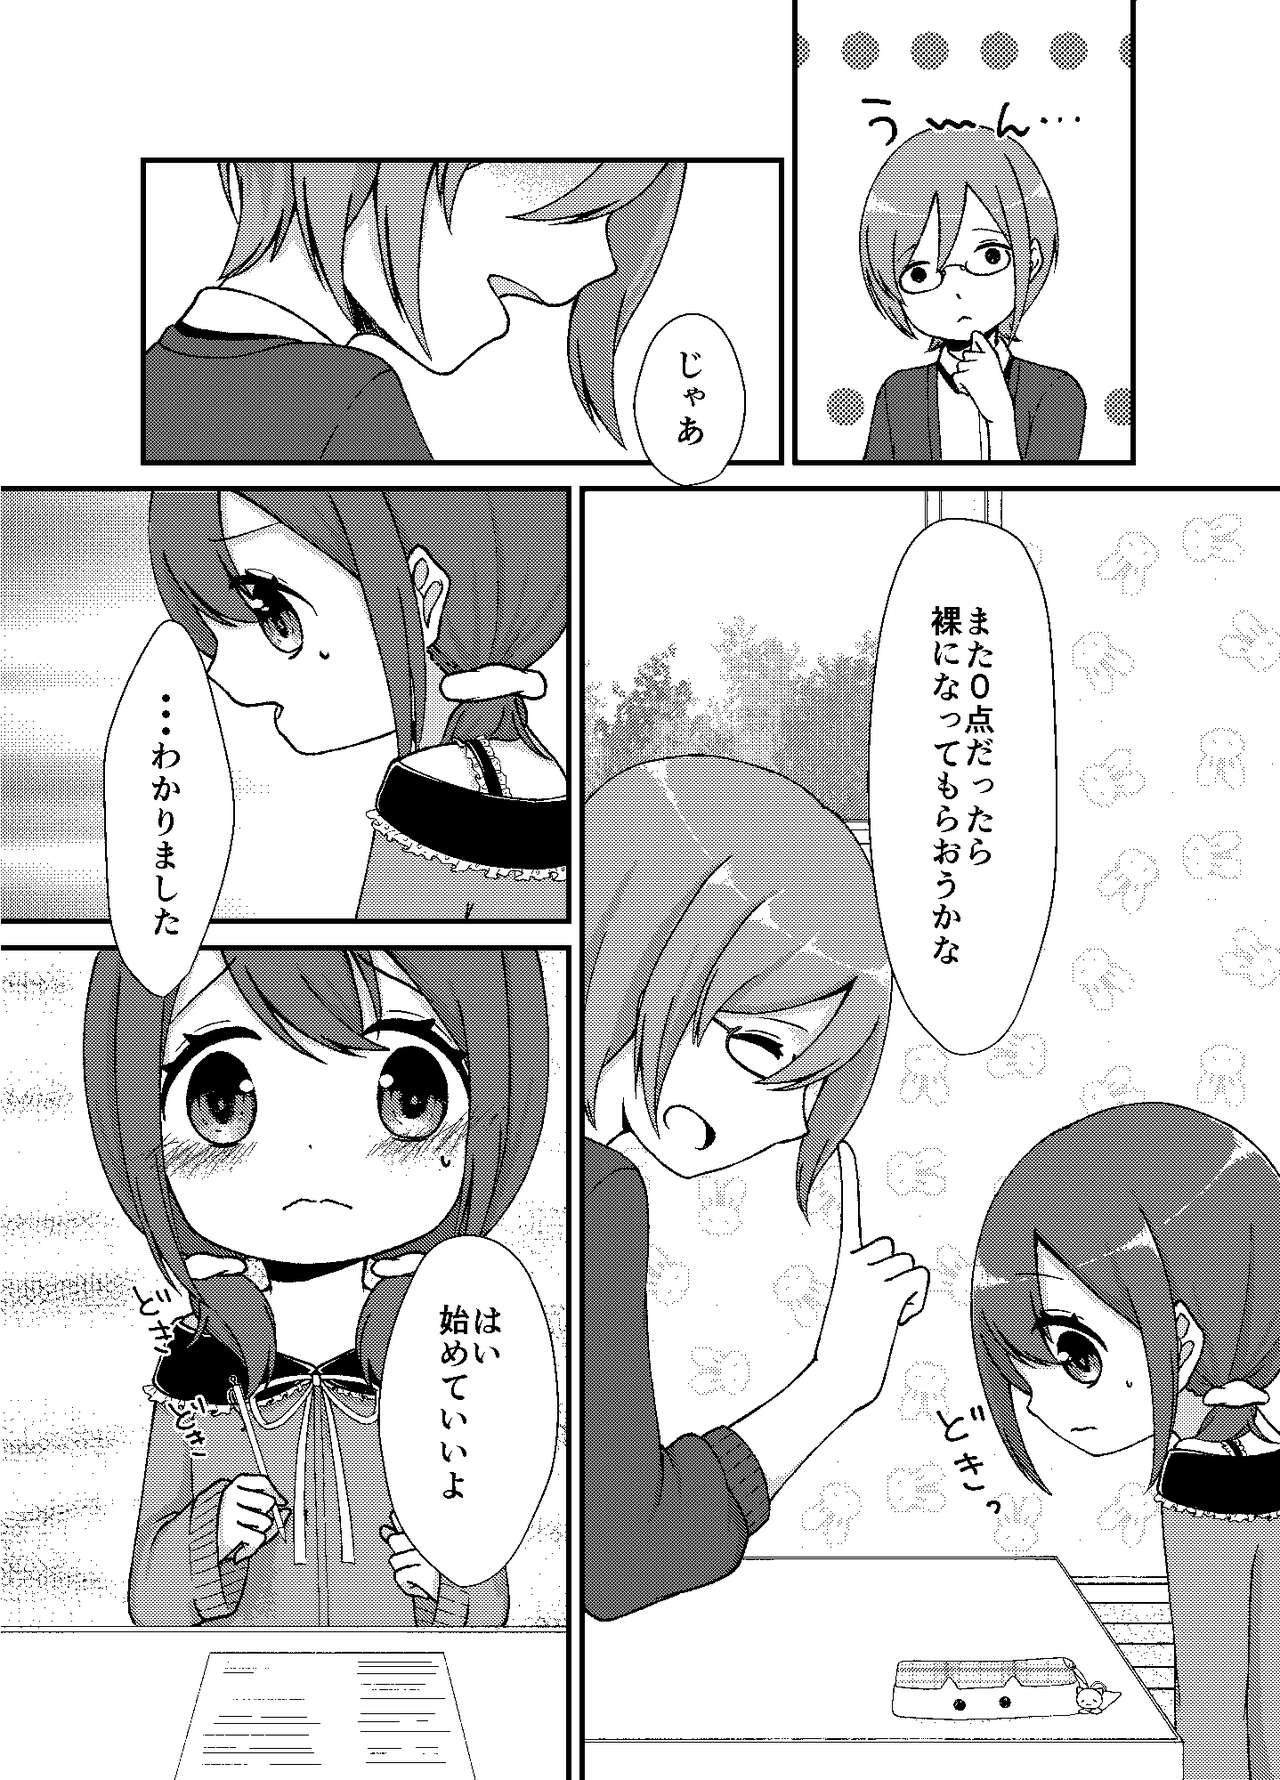 Shaved やればできるもん！ Boobies - Page 6